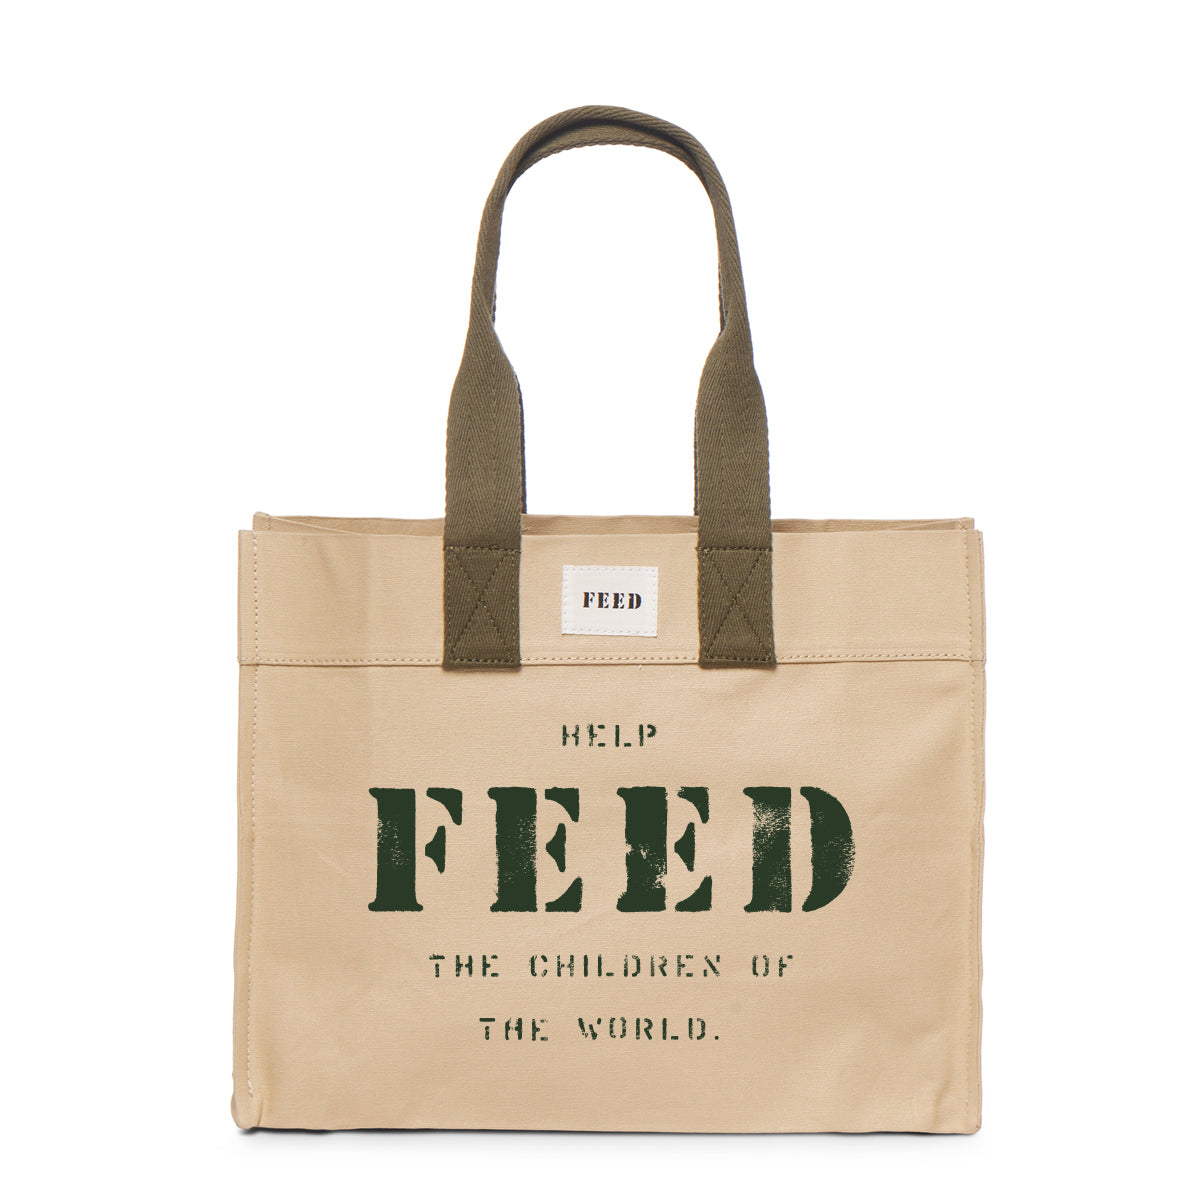 Sand | Front of sand FEED 10 tote bag with FEED the Children of the World text.